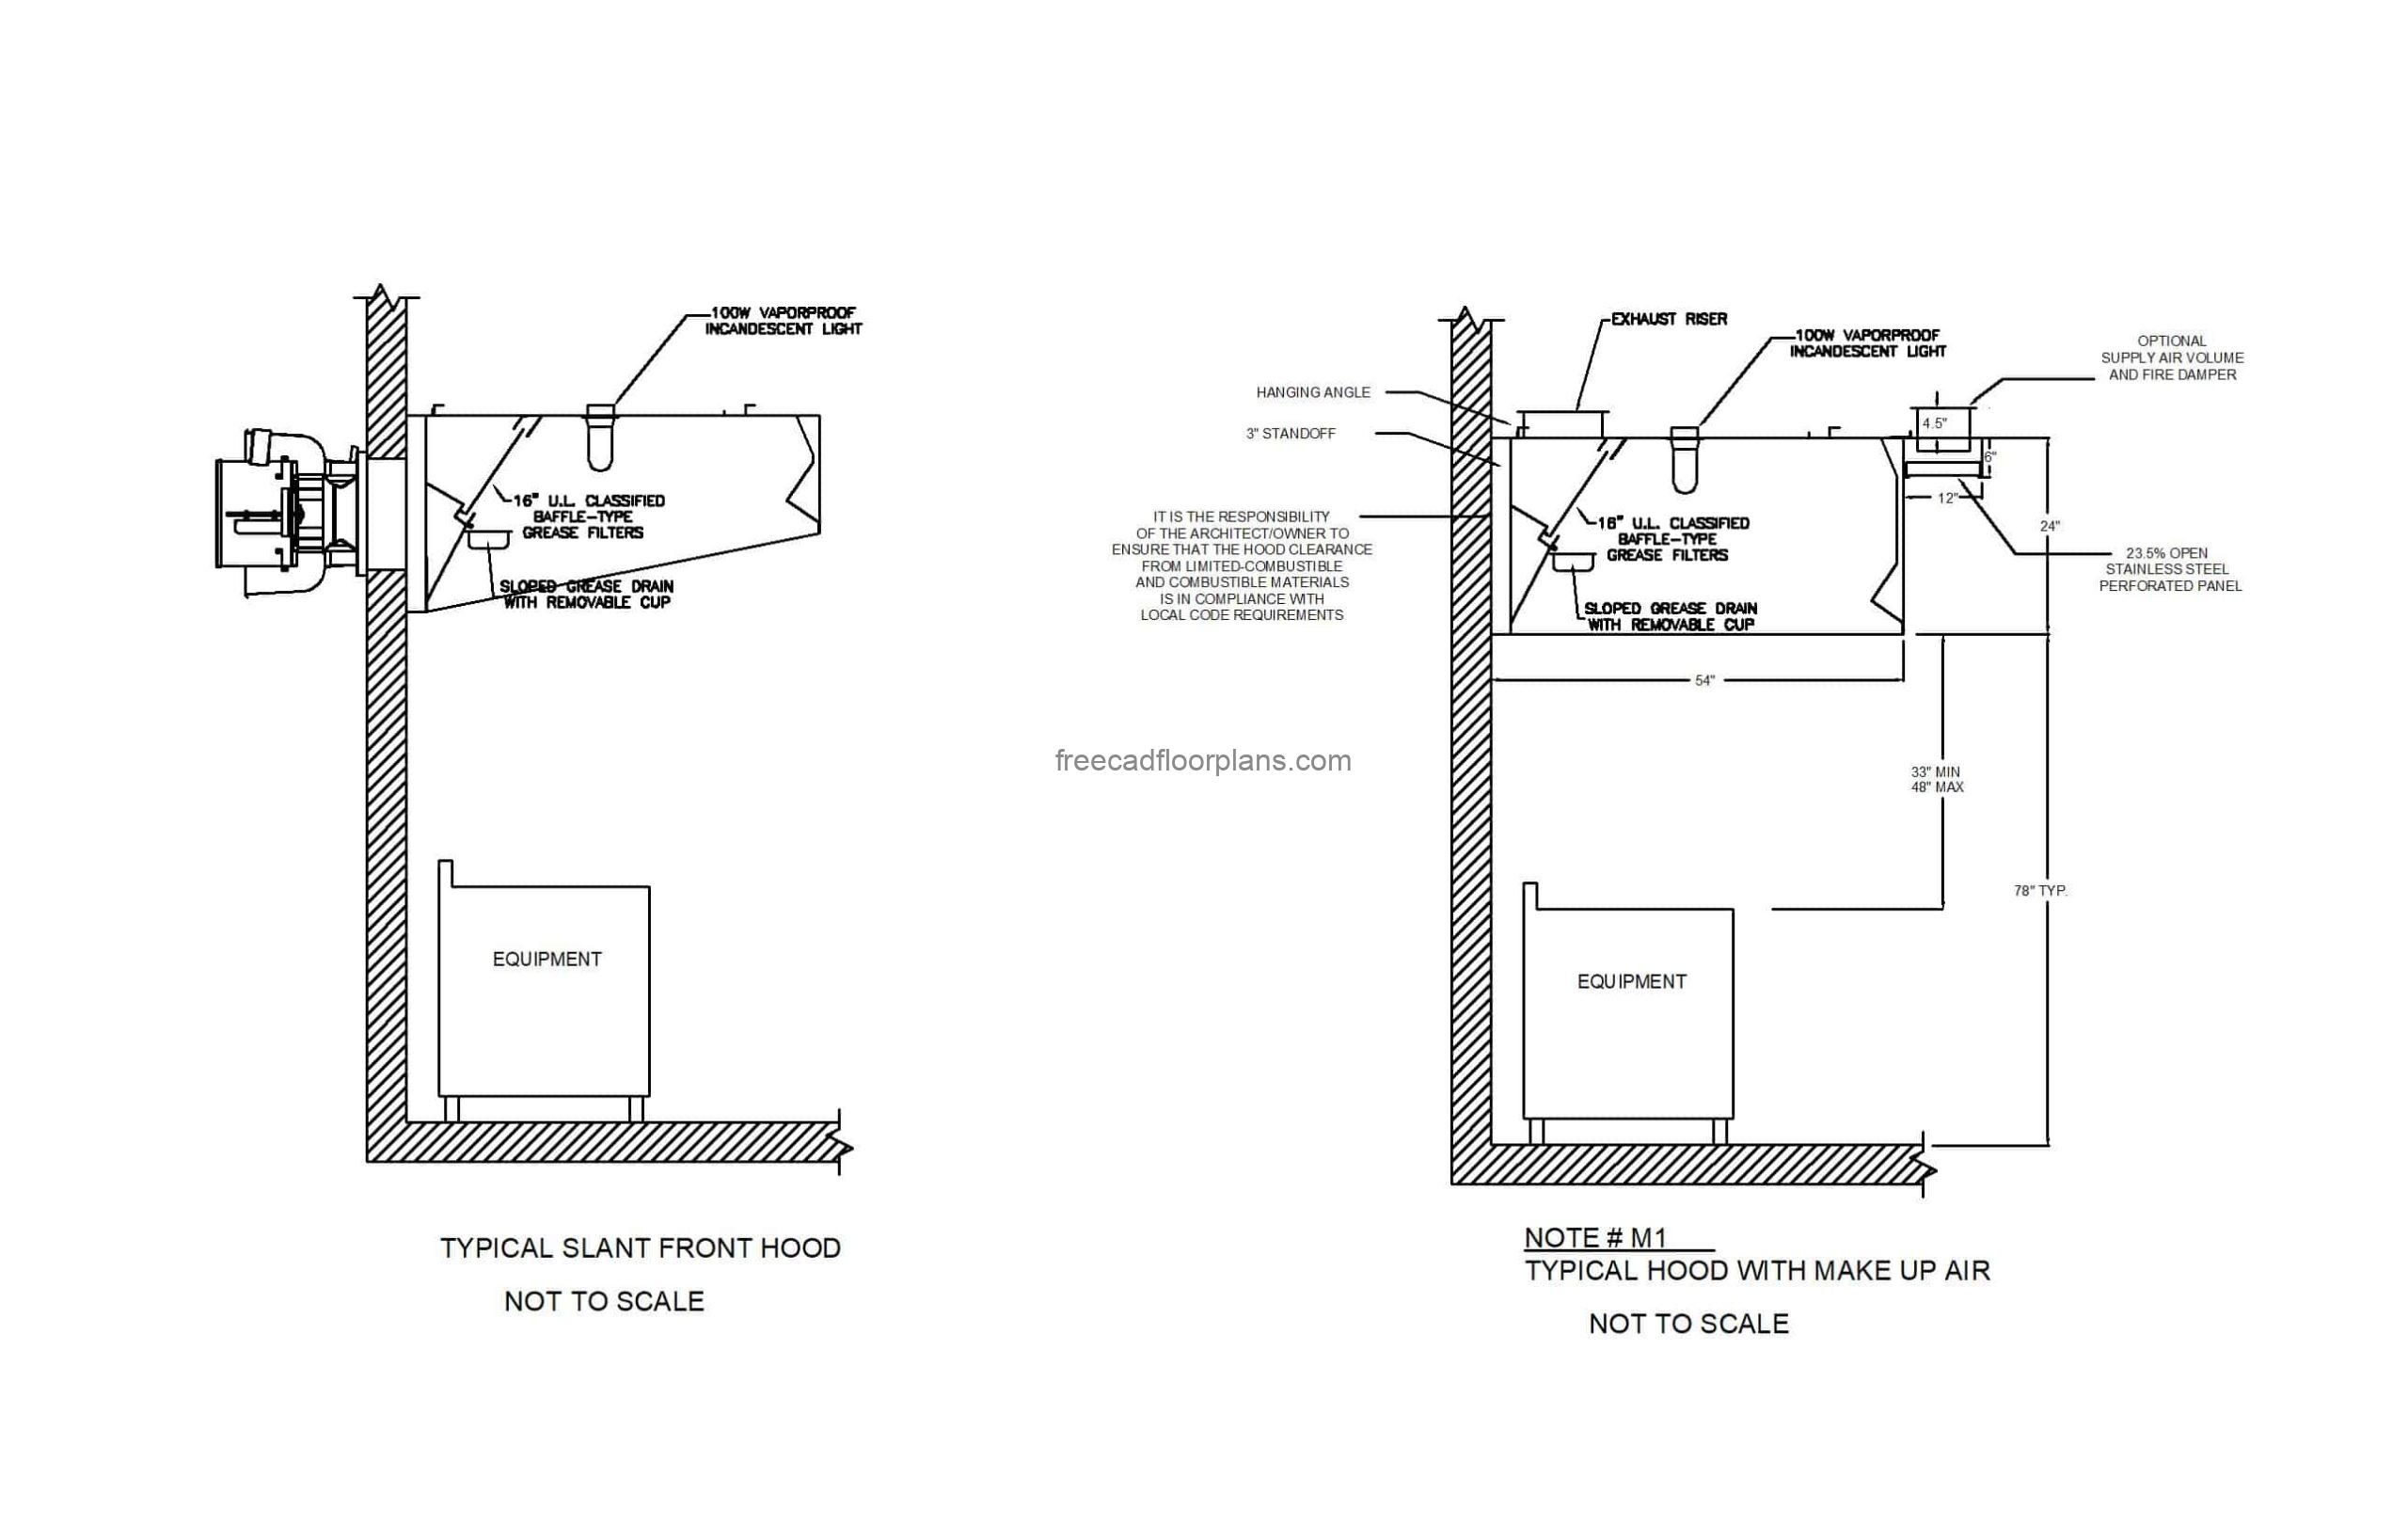 autocad drawing of a commercial kitchen hood section plan 2d views, dwg file for free download